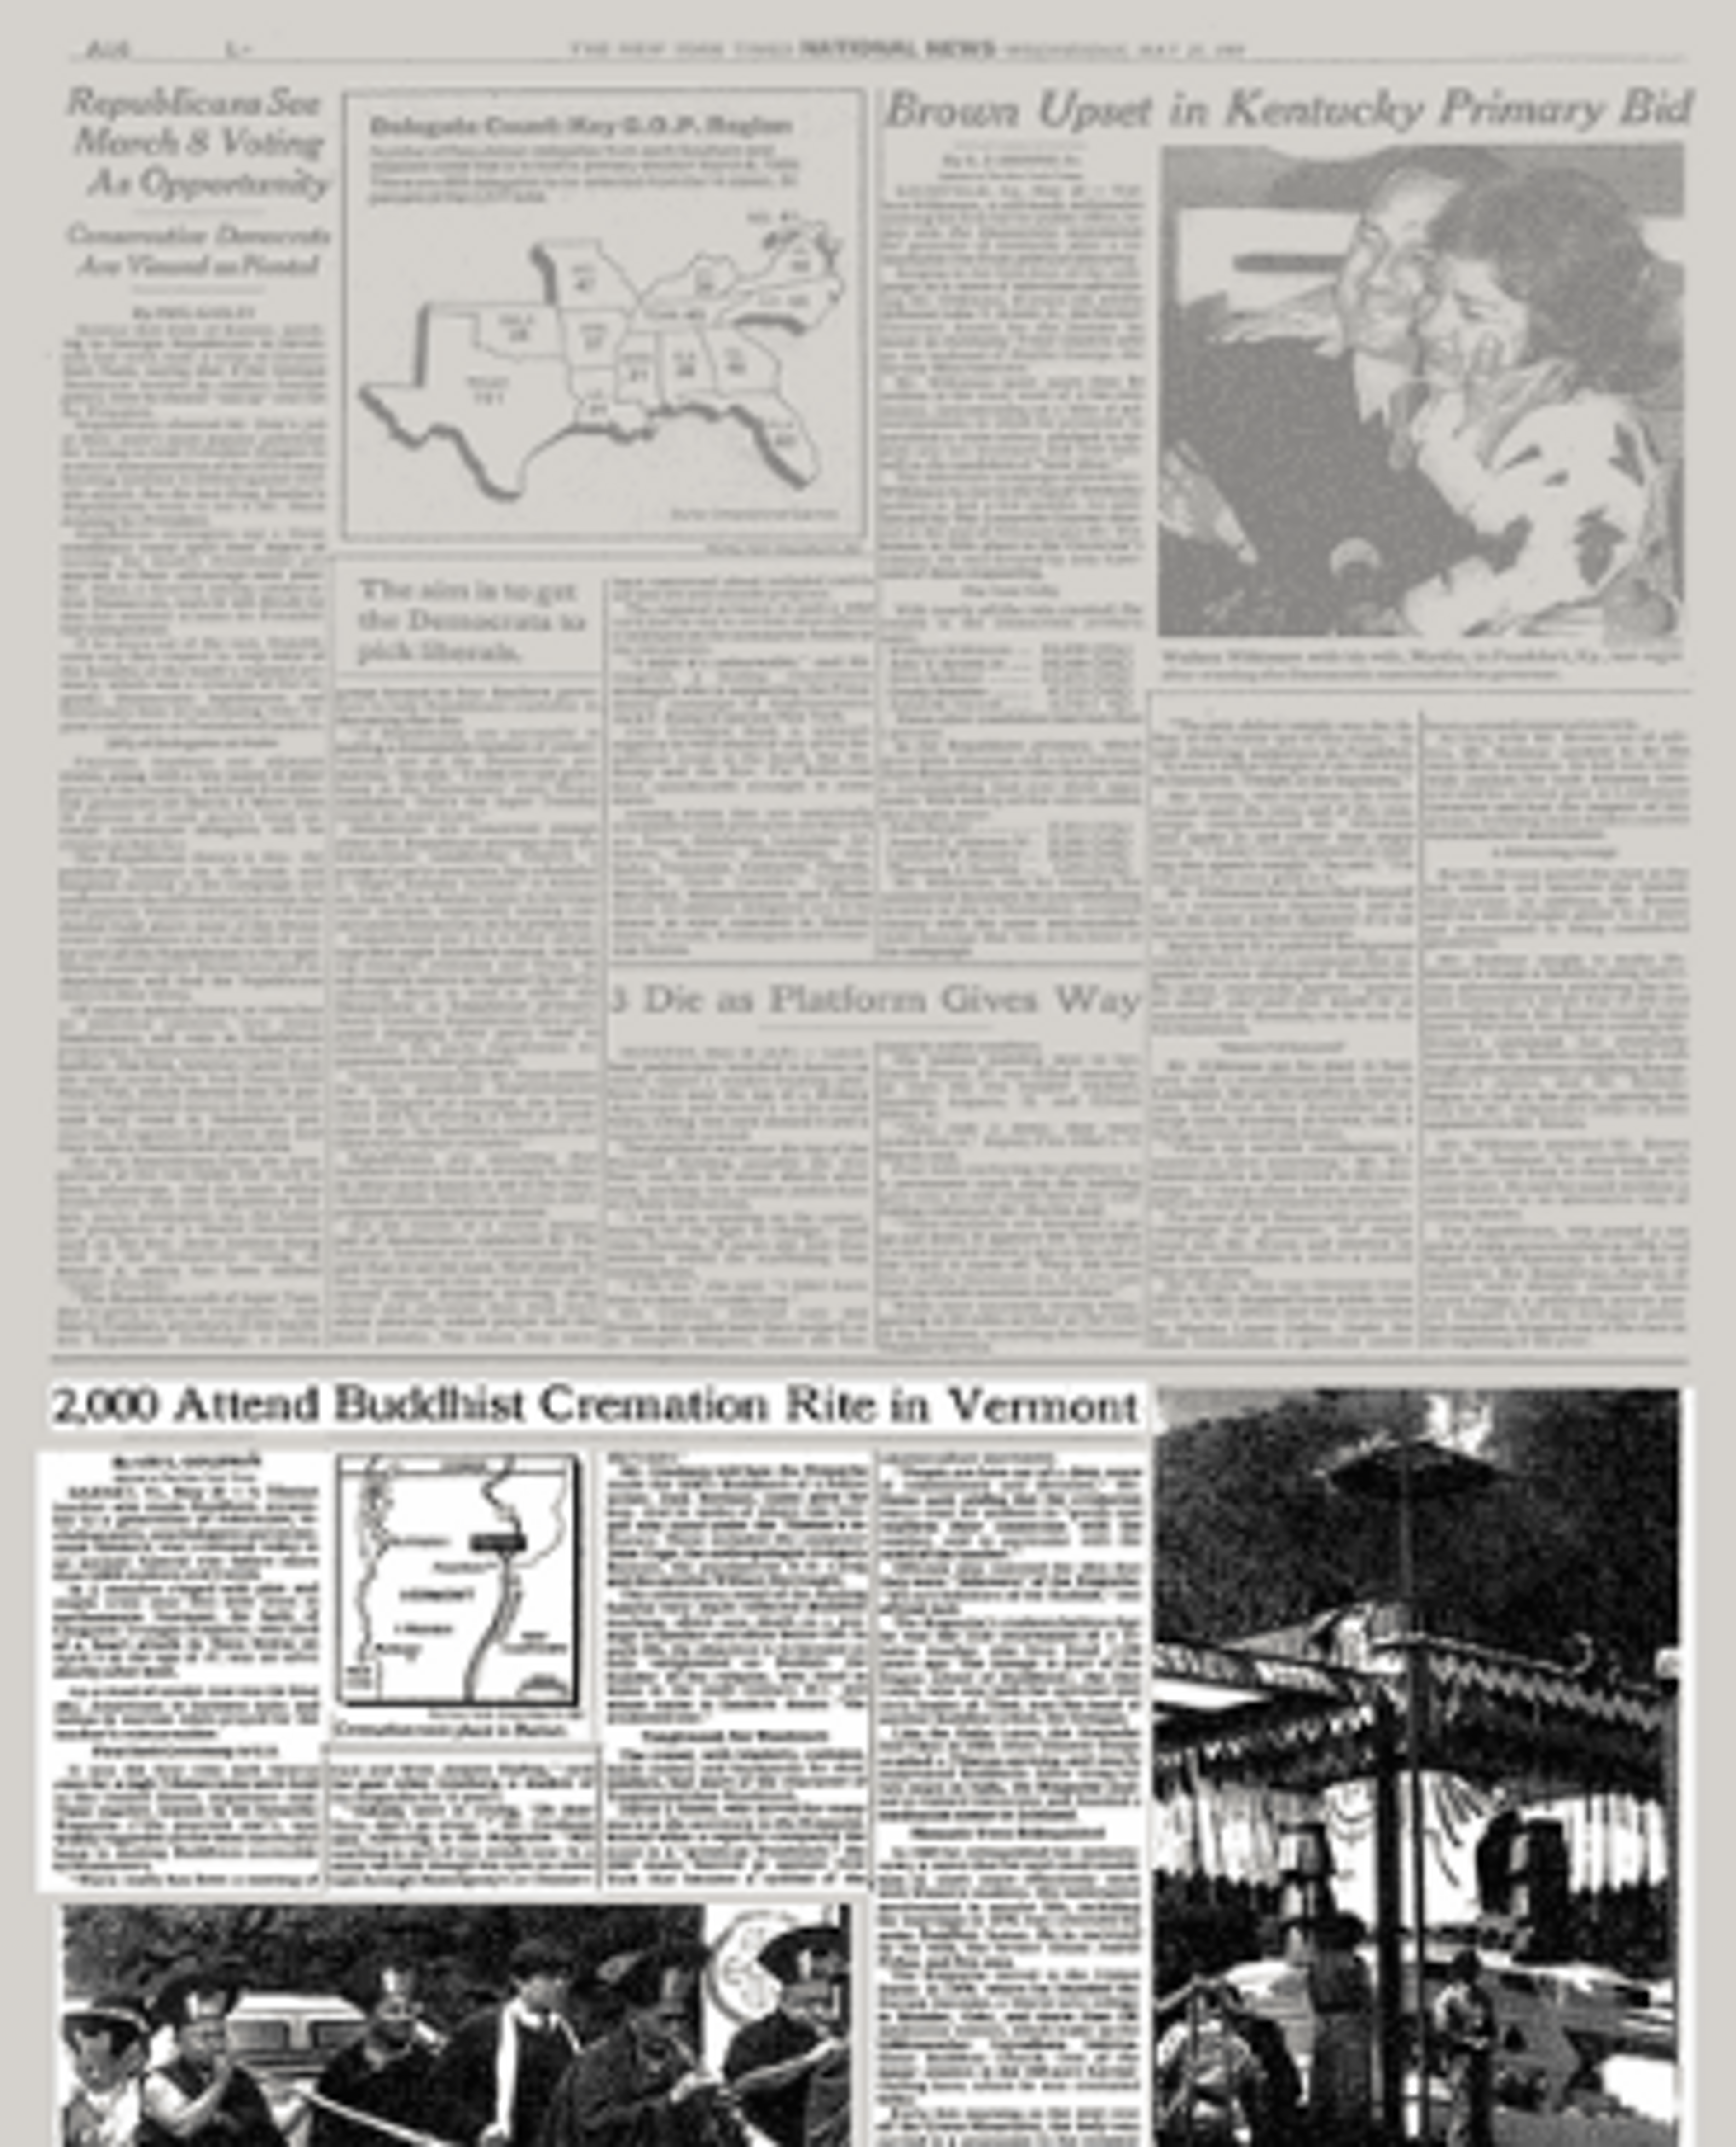 KCL New York Times Article 1987